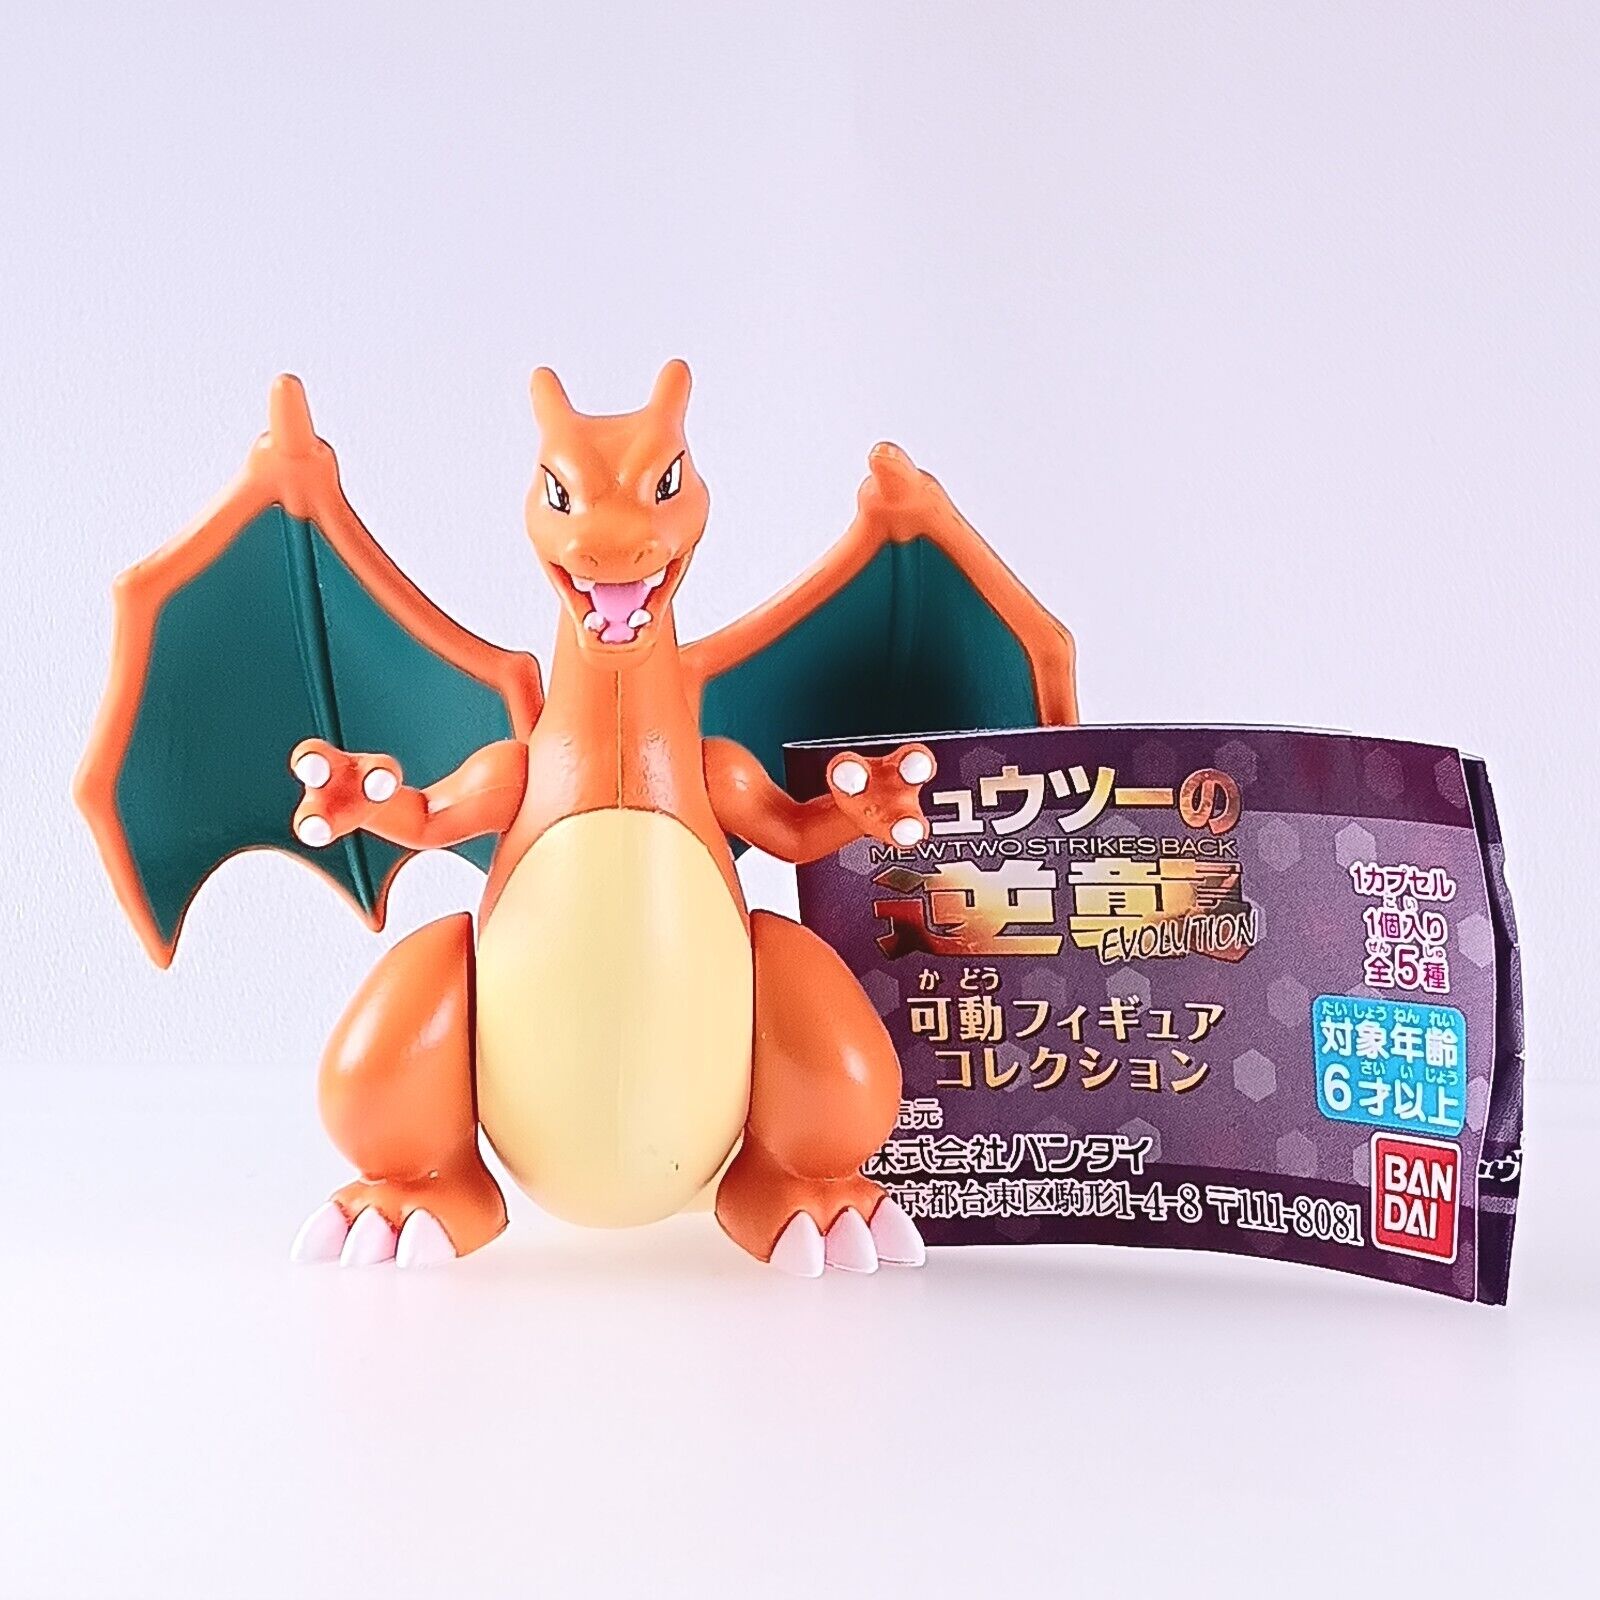 Charizard Pokemon Mewtwo Strikes Back Movable Figure Collection 2019 From Japan